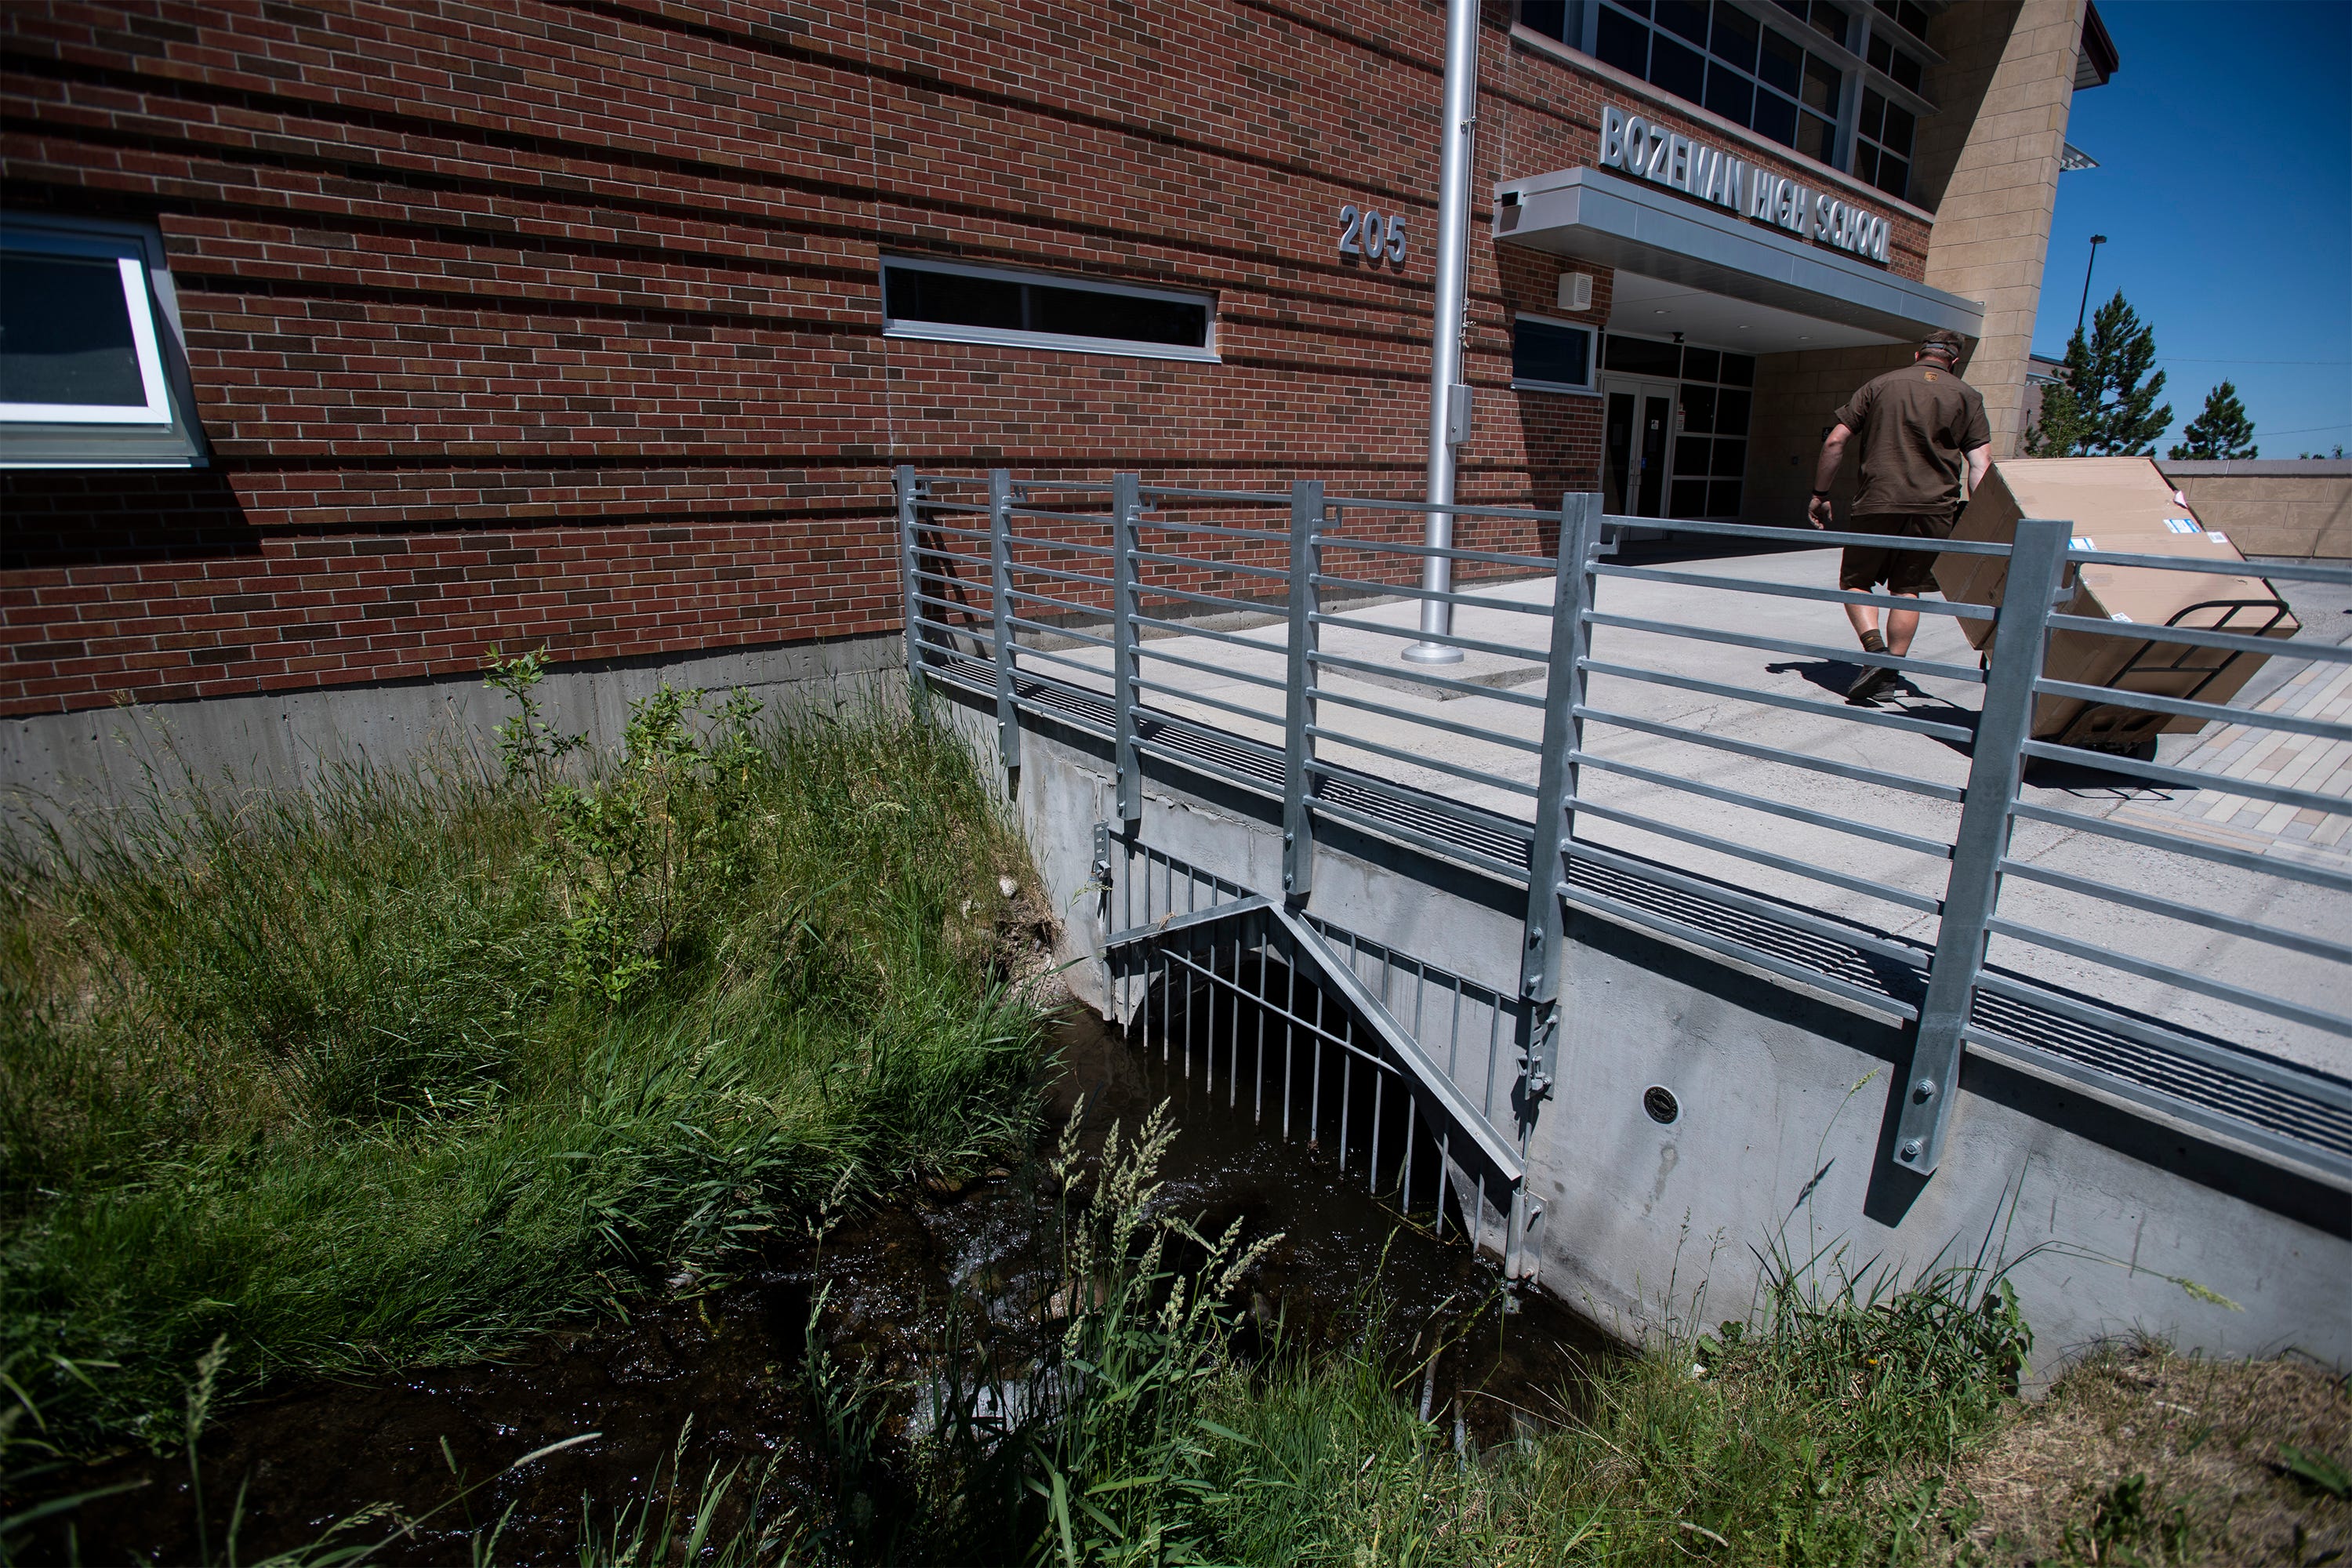 Water flows through an irrigation ditch and under an entrance to Bozeman High School in Bozeman, Mont., on June 16, 2021.